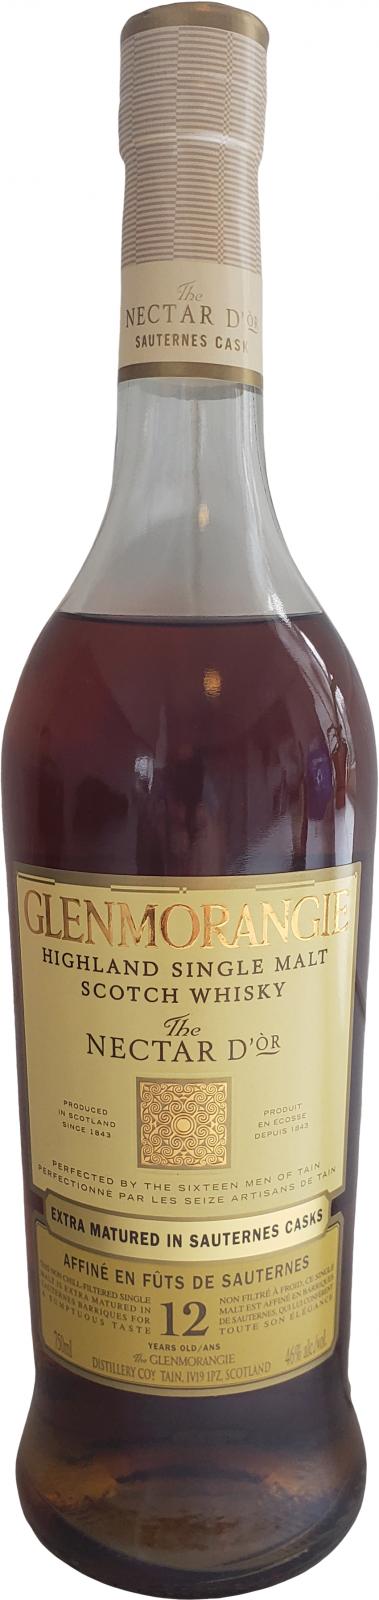 Glenmorangie 12yo Nectar D'Or 2nd Edition Extra Matured in Sauternes 46% 750ml